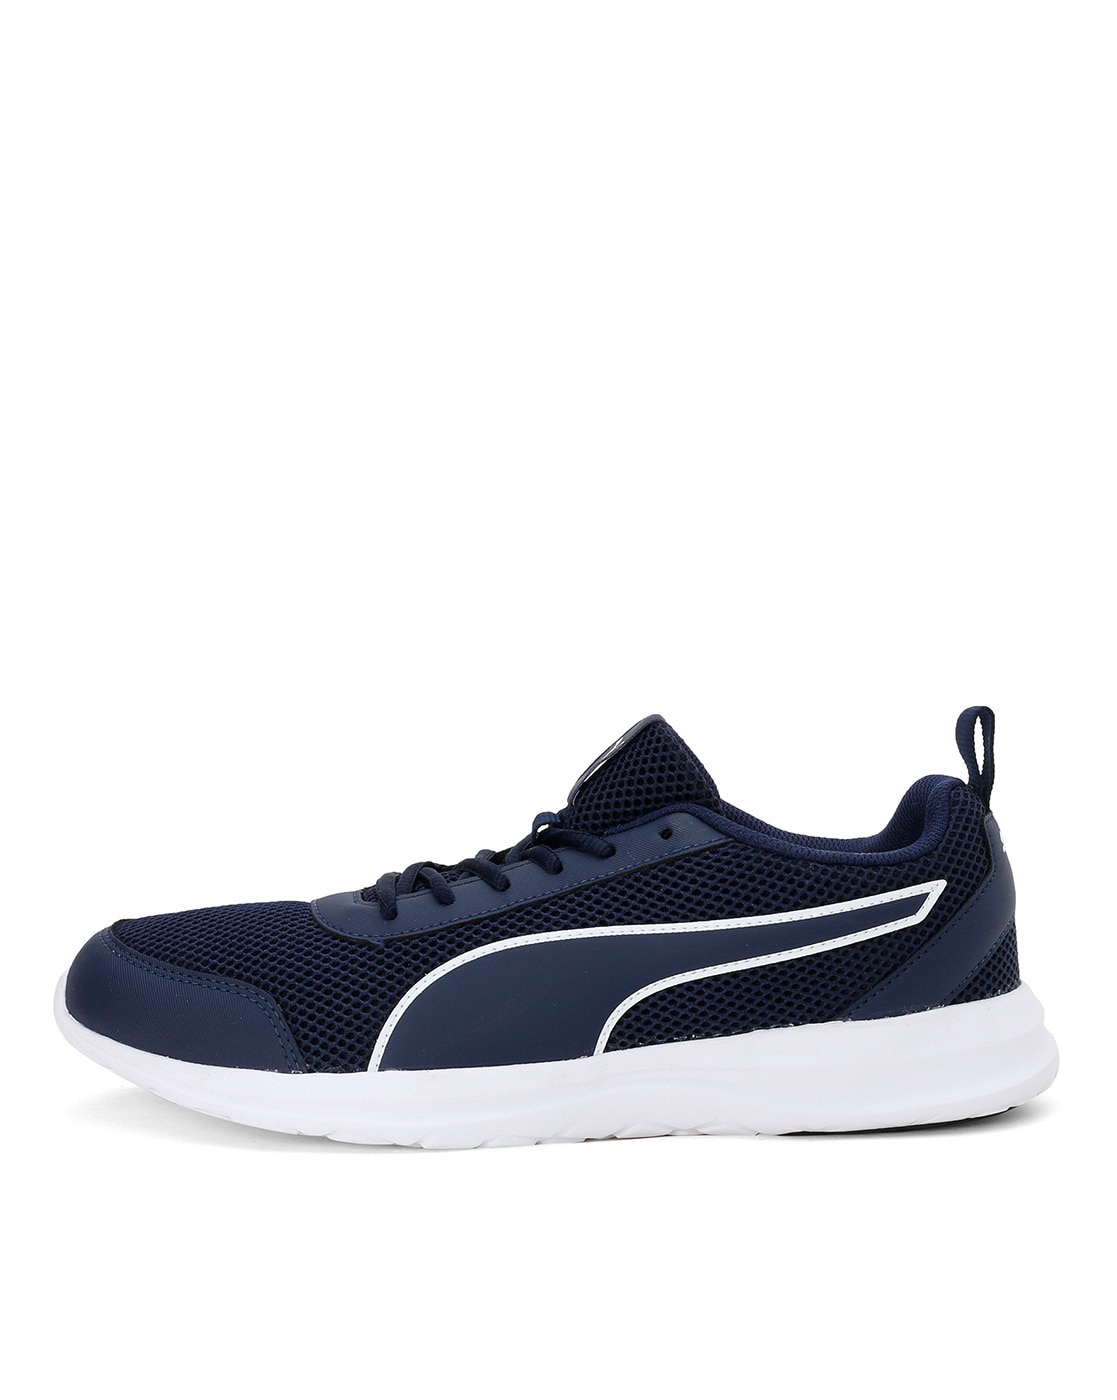 Buy Puma Men Blue NETFIT Astro Running Shoes - Sports Shoes for Men  11418102 | Myntra